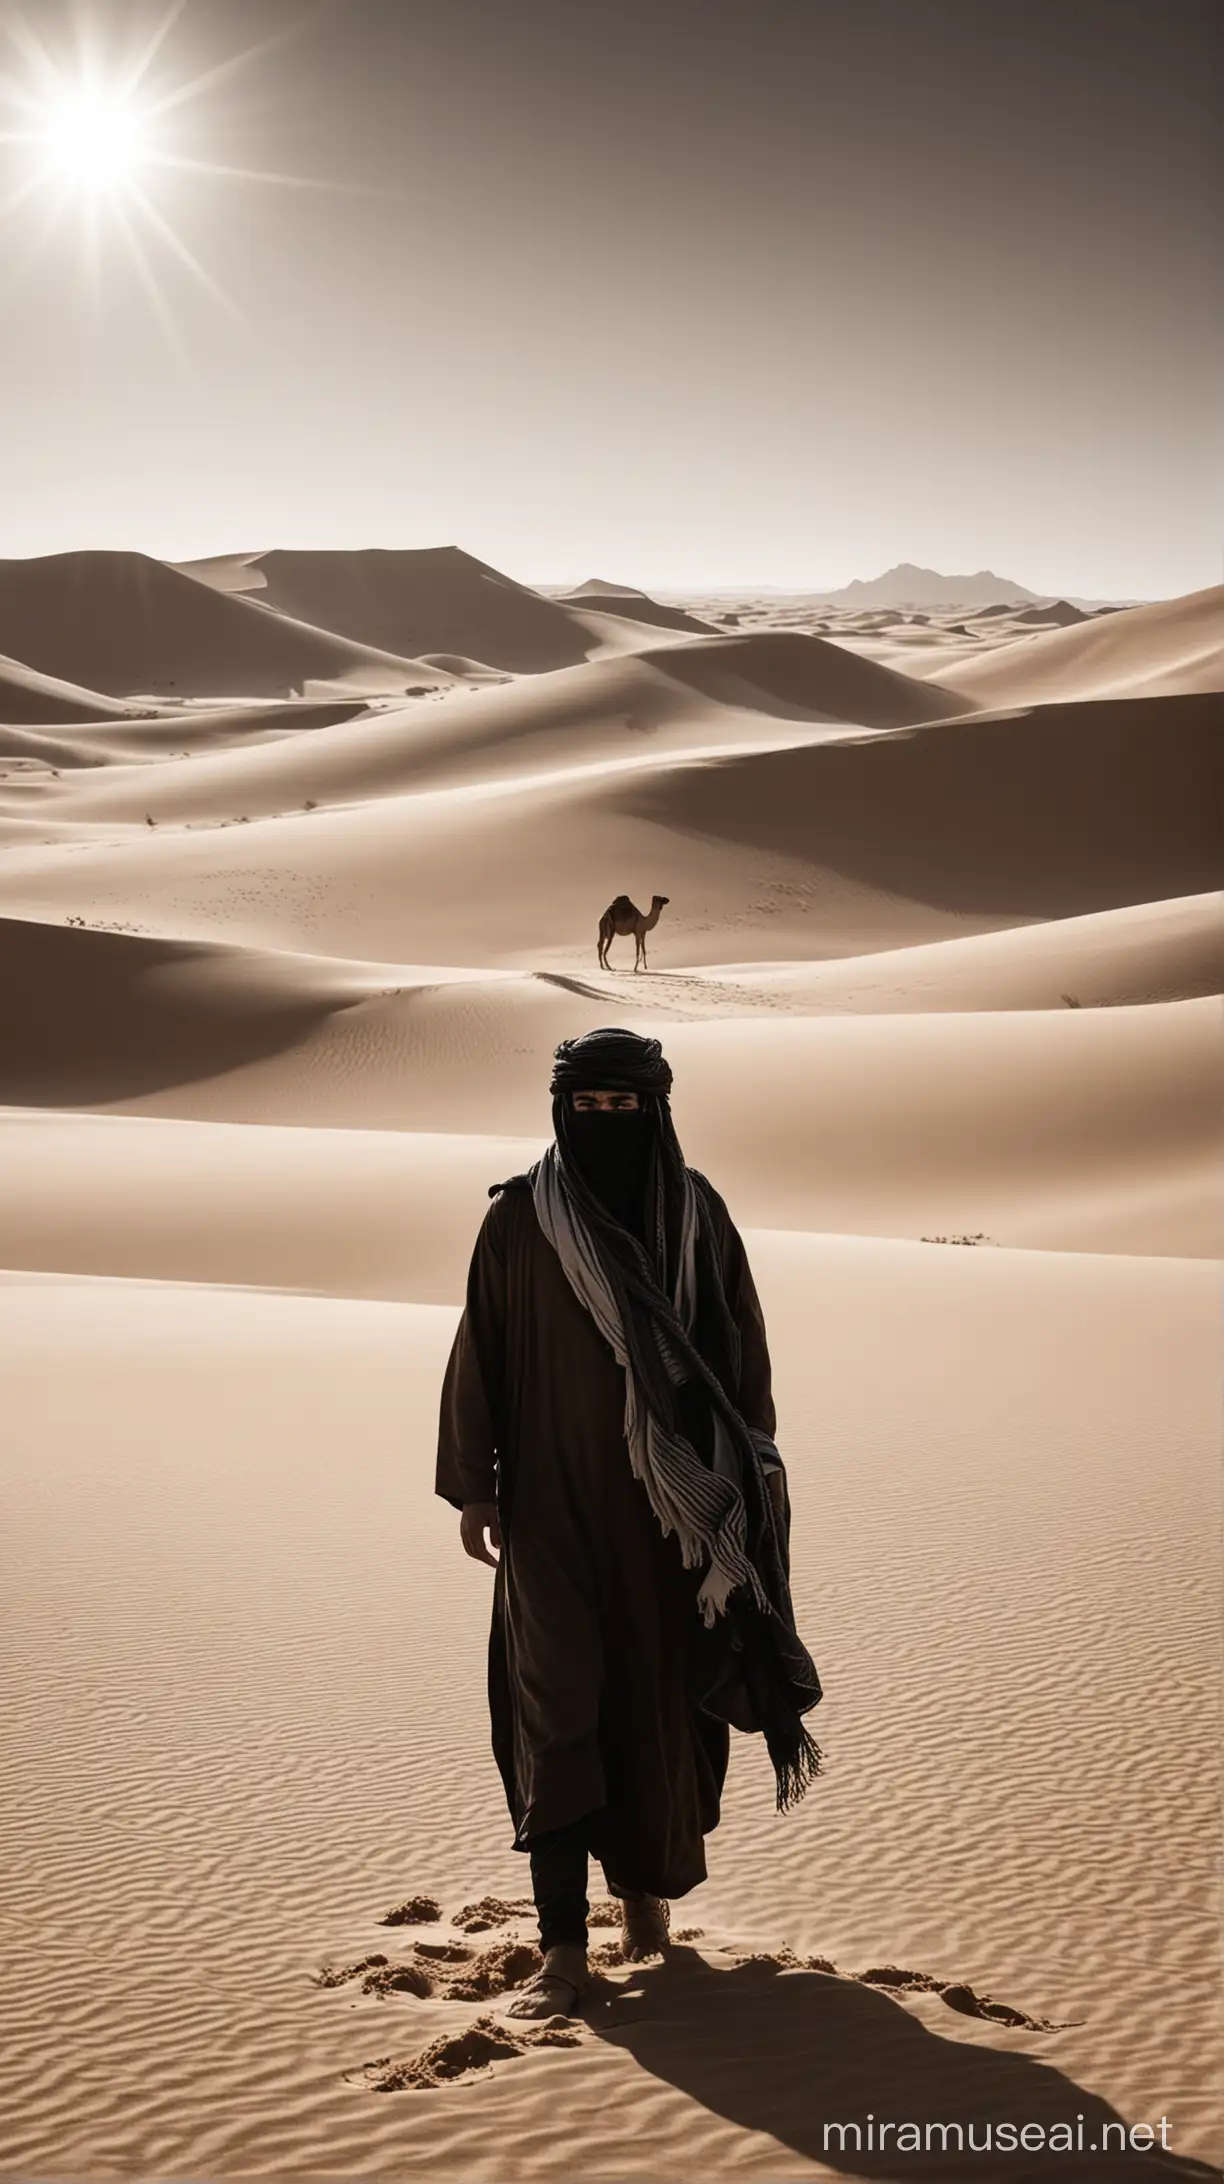 Create a striking scene featuring an Arab man standing amidst the vast expanse of a desert landscape. Show the man dressed in traditional black attire, his face partially obscured by a scarf or shemagh covering his mouth and nose, shielding him from the blowing sand and harsh sun. Depict the man's gaze fixed on the horizon, his posture conveying a sense of resilience and determination despite the challenging conditions. Surround him with rolling dunes and shimmering heat waves, with the silhouette of distant sand dunes and a solitary camel adding to the sense of isolation and desolation. Capture the timeless beauty and rugged majesty of the desert, with the man embodying the enduring spirit of survival and adaptation in this unforgiving environment. Ensure that the scene evokes a sense of mystery and intrigue, inviting viewers to contemplate the man's journey and the secrets hidden within the sands of the desert."